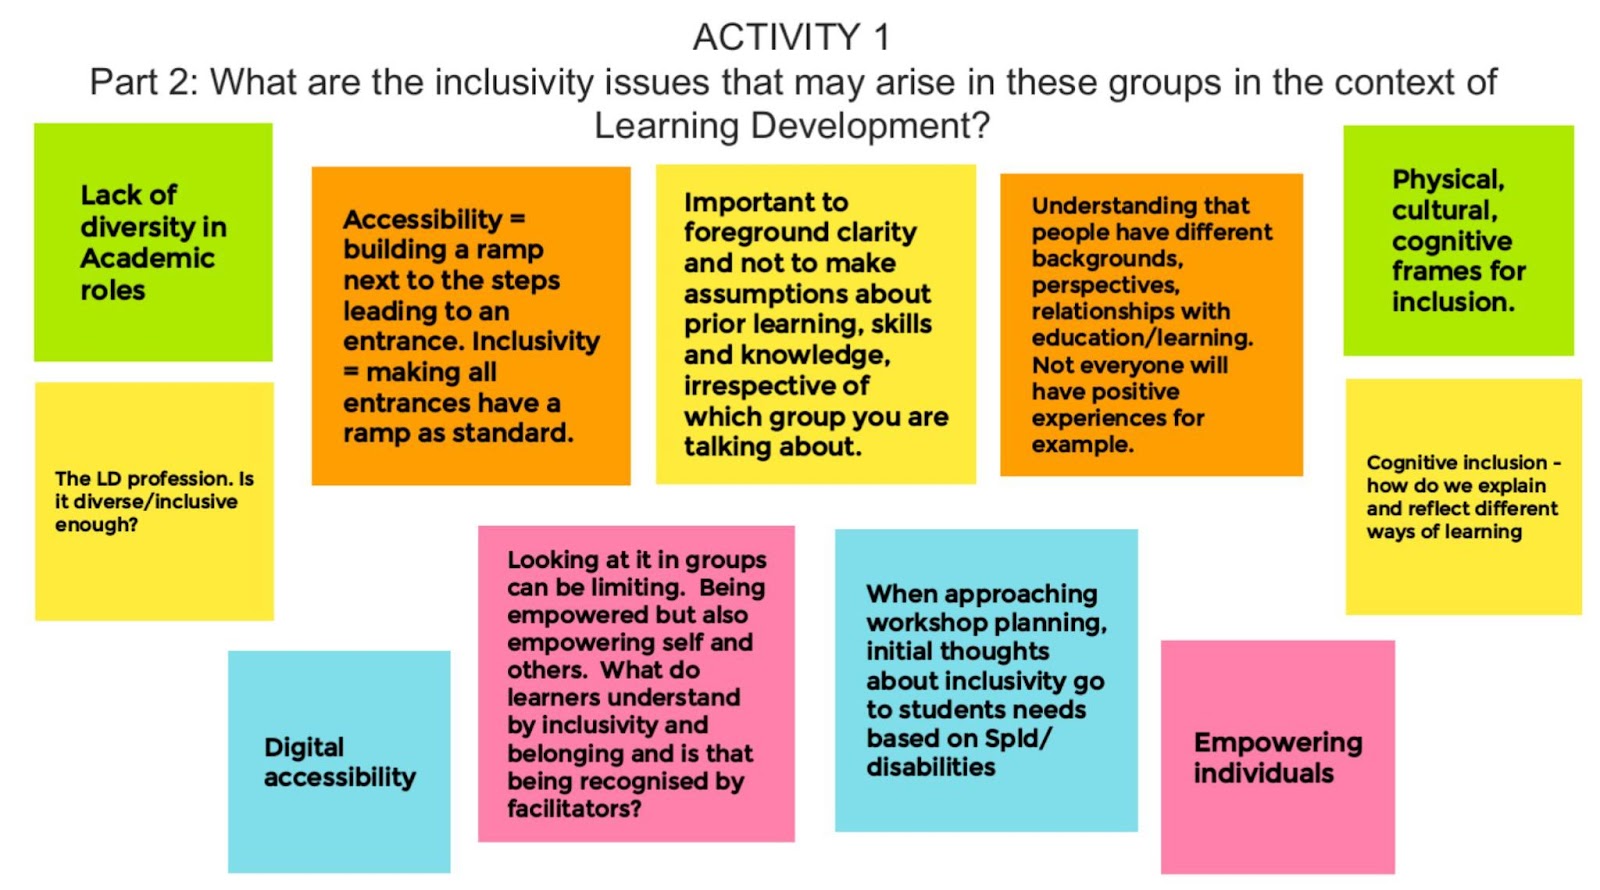 Post it notes and text detailing inclusivity issues that may arise in these groups in context of learning development. This particular image highlights some groups talking about empowering individuals and not just focusing on specific groups. 